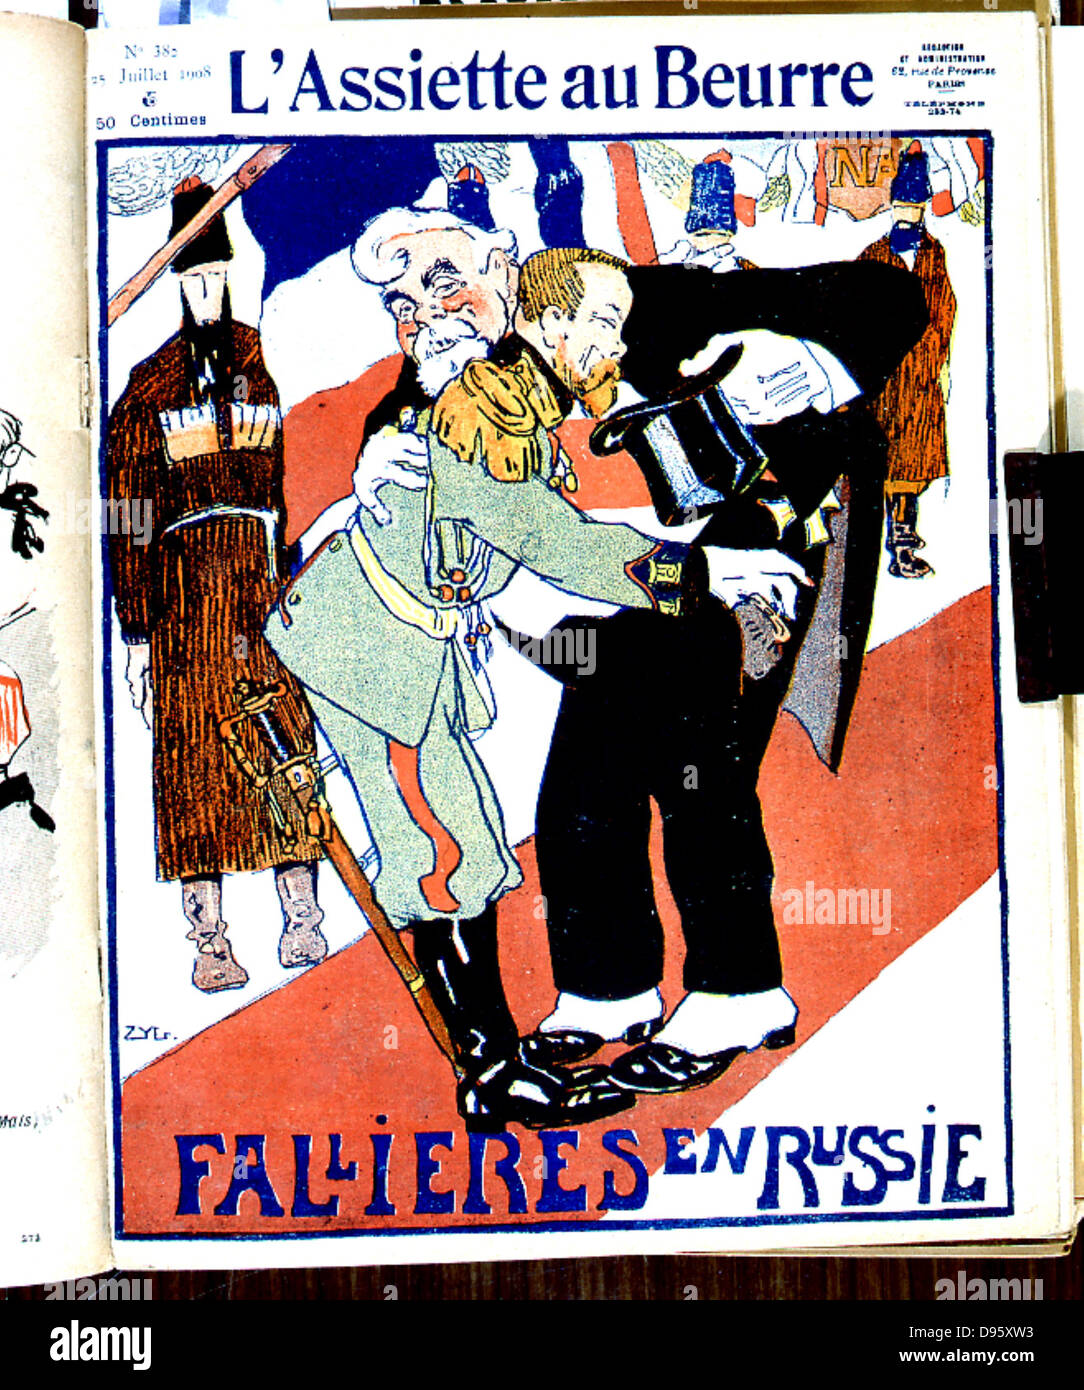 Russian foreign policy. In 1908 Armand Fallieres, President of France 1906-1913, visited Russia. Here he is having his pocket picked by the Tsar. Cartoon from L'Assiette au Buerre', Paris, 25 July 1908. Stock Photo